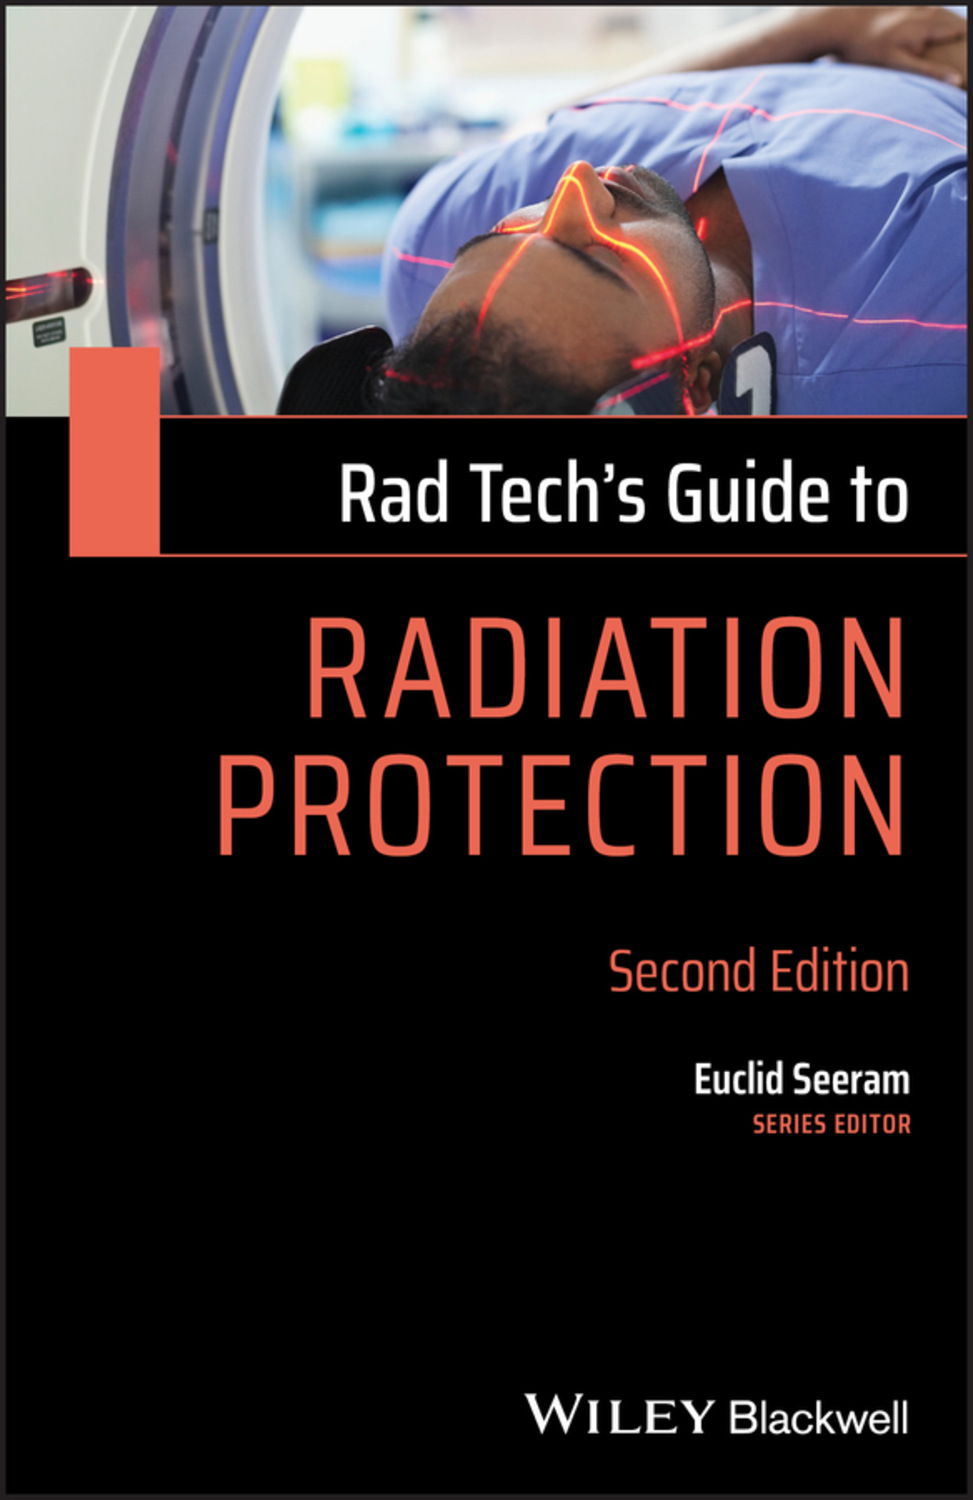 Euclid Seeram, Rad Tech's Guide to Radiation Protection read online